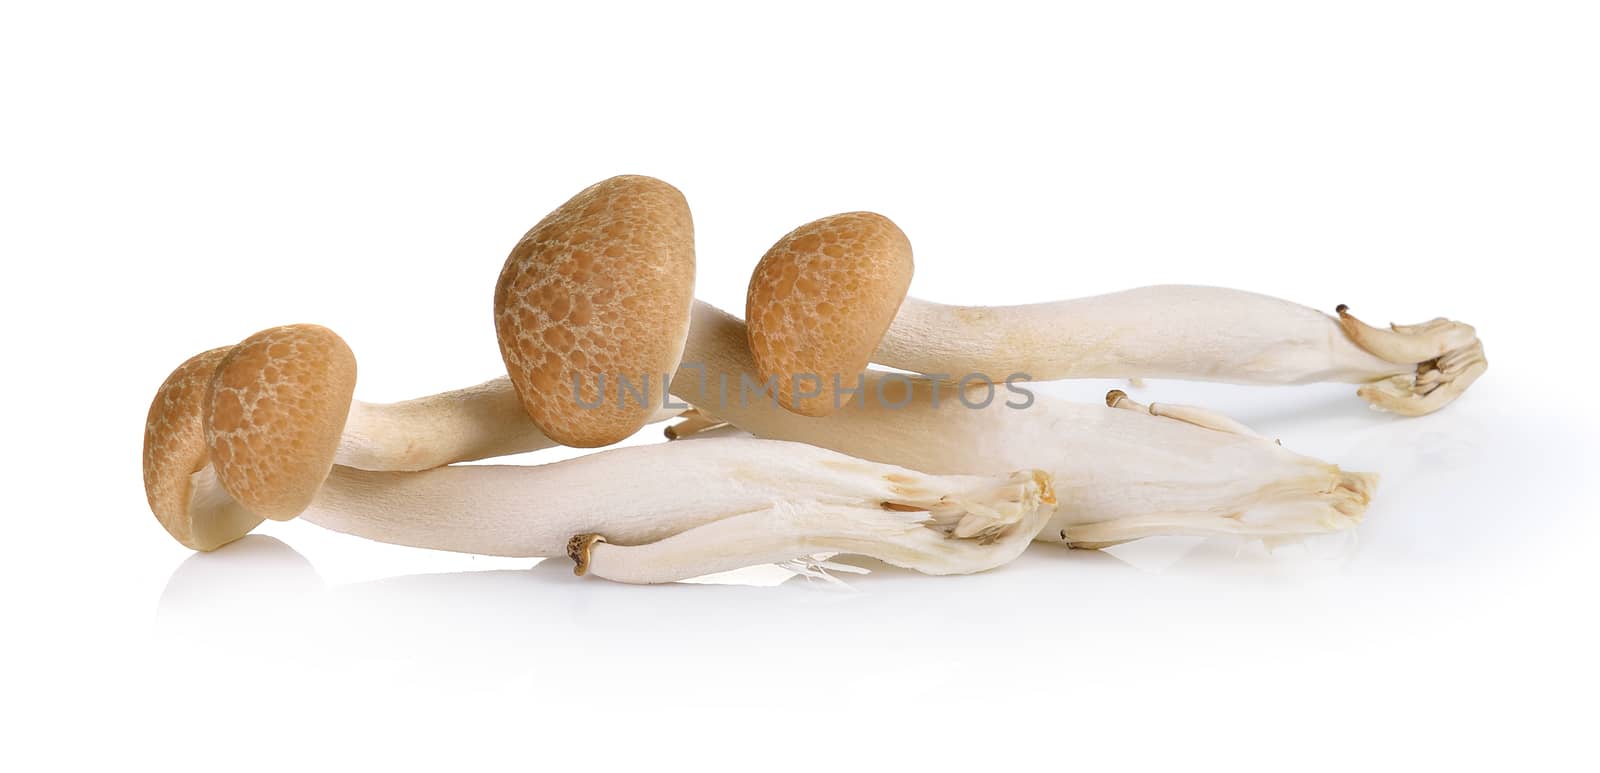 Brown beech mushrooms isolated on white background